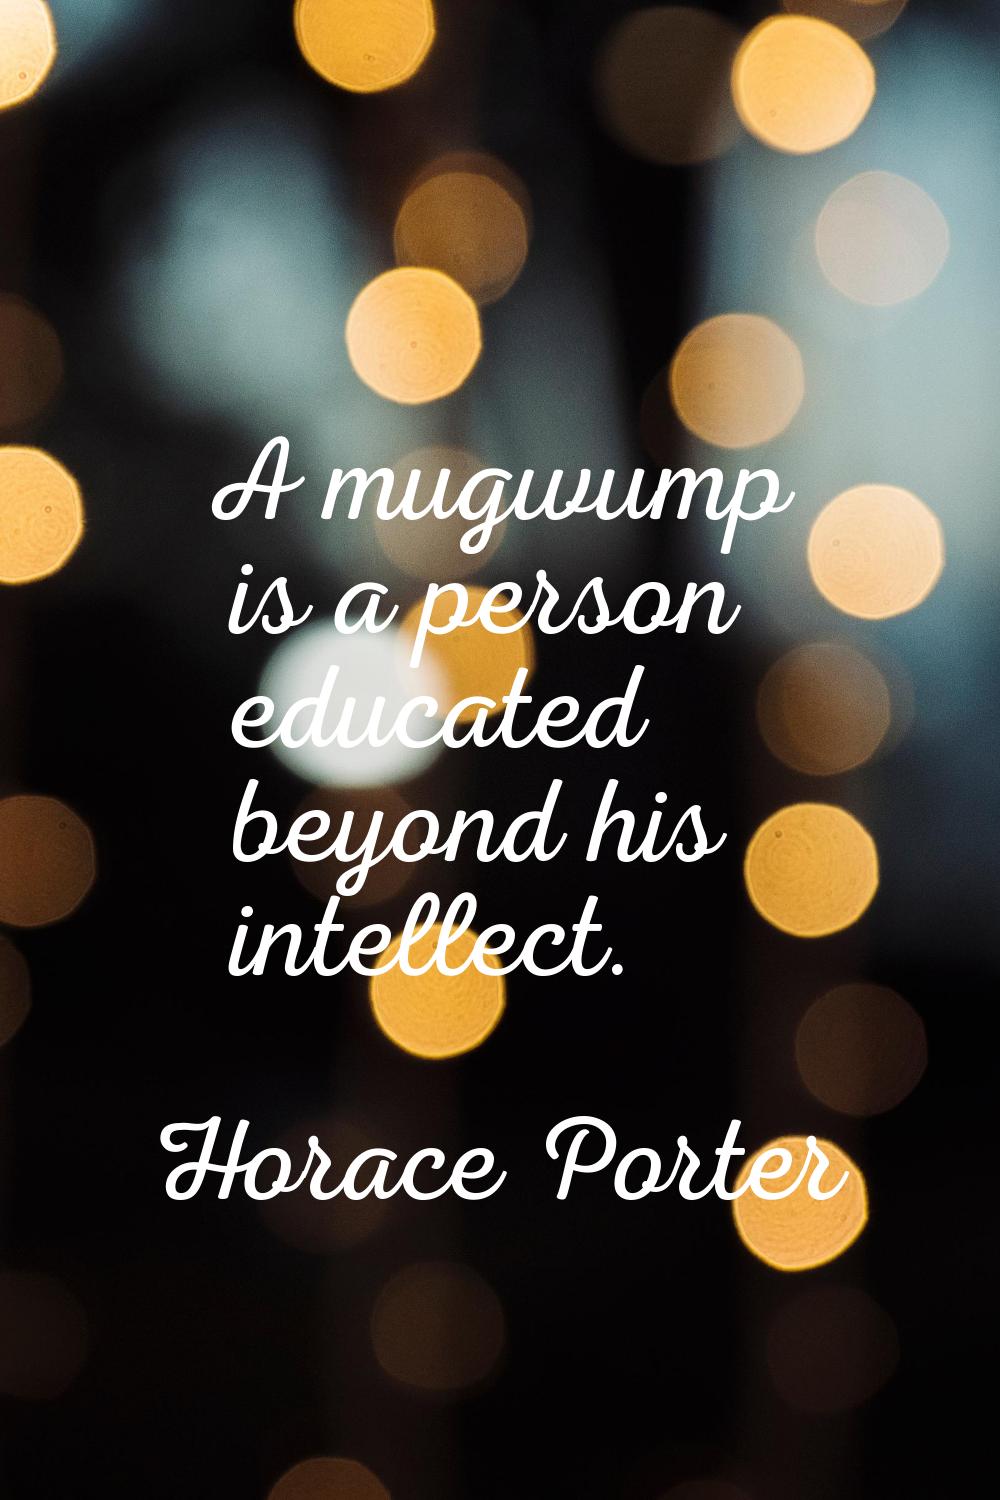 A mugwump is a person educated beyond his intellect.